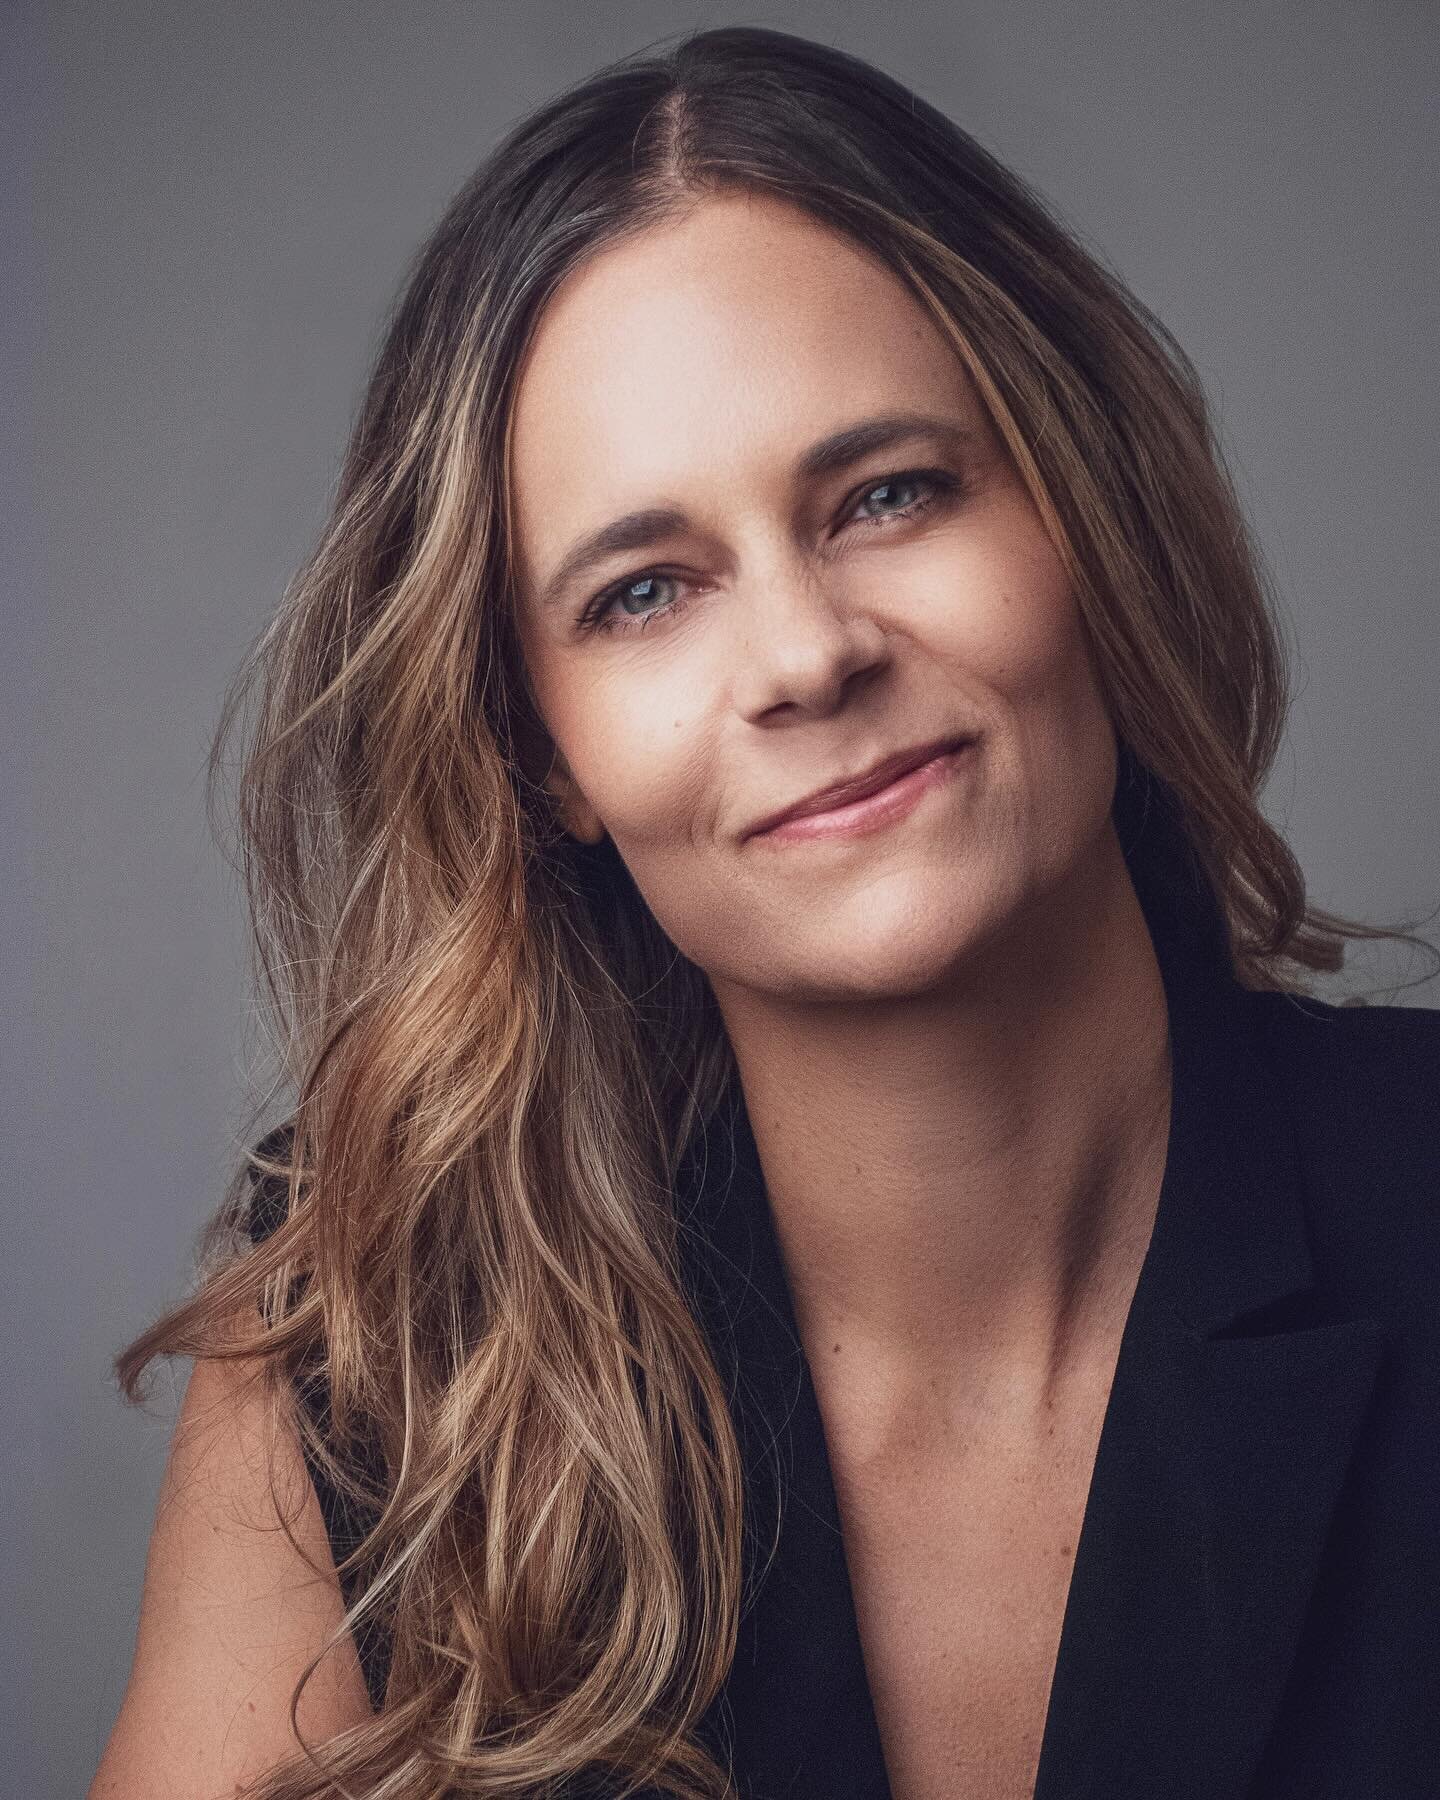 Really excited to announce that the super talented @heatherturman is joining our team as a Producer!

Heather Turman is an award-winning writer, producer and director with a heavy background in comedy. She sold her first feature screenplay THE CATCH 